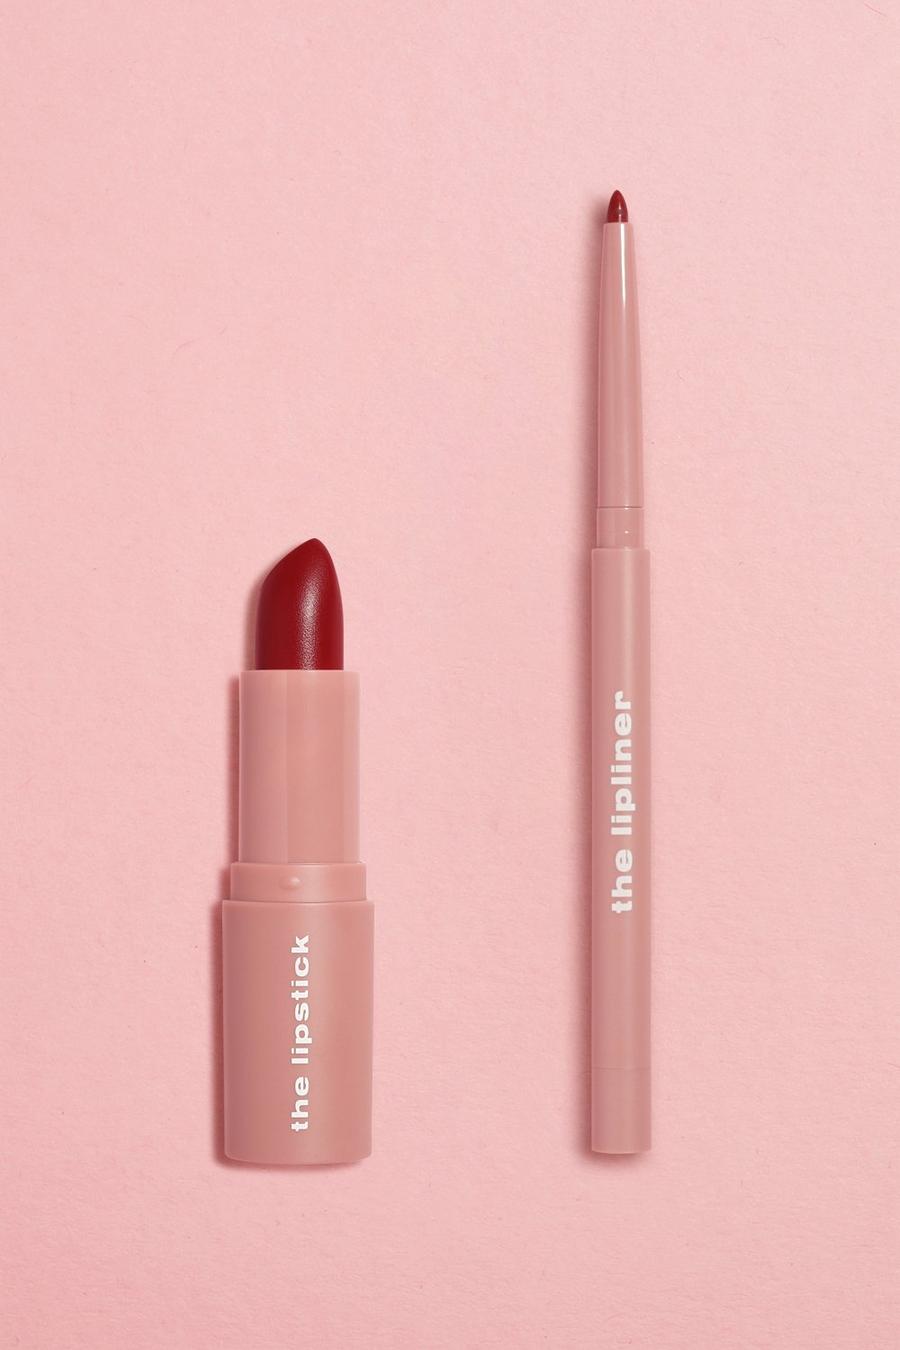 Boohoo Beauty Klassisches Lippenset - Rot, Red rouge